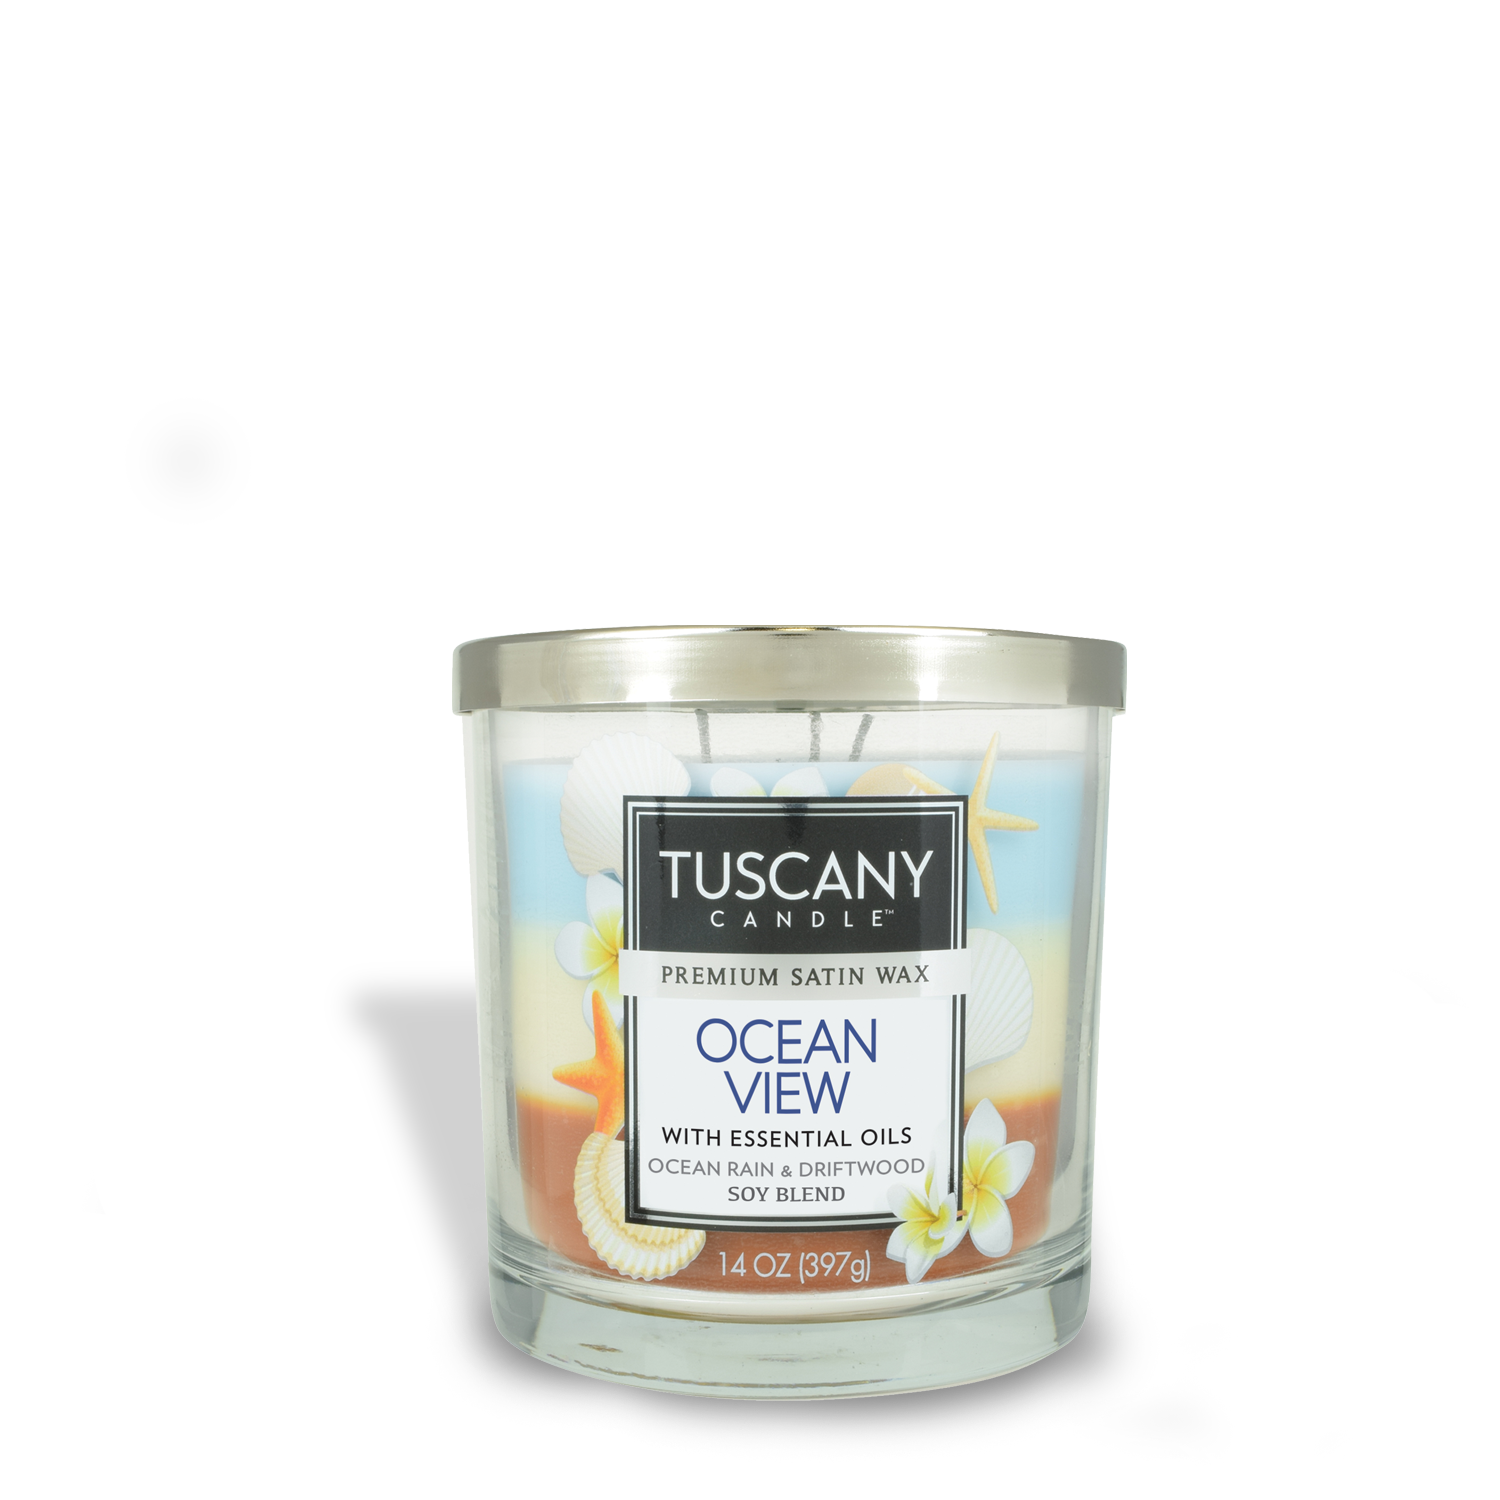 Tuscany Candle® EVD Ocean View Long-Lasting Scented Jar Candle (14 oz) with a hint of driftwood.